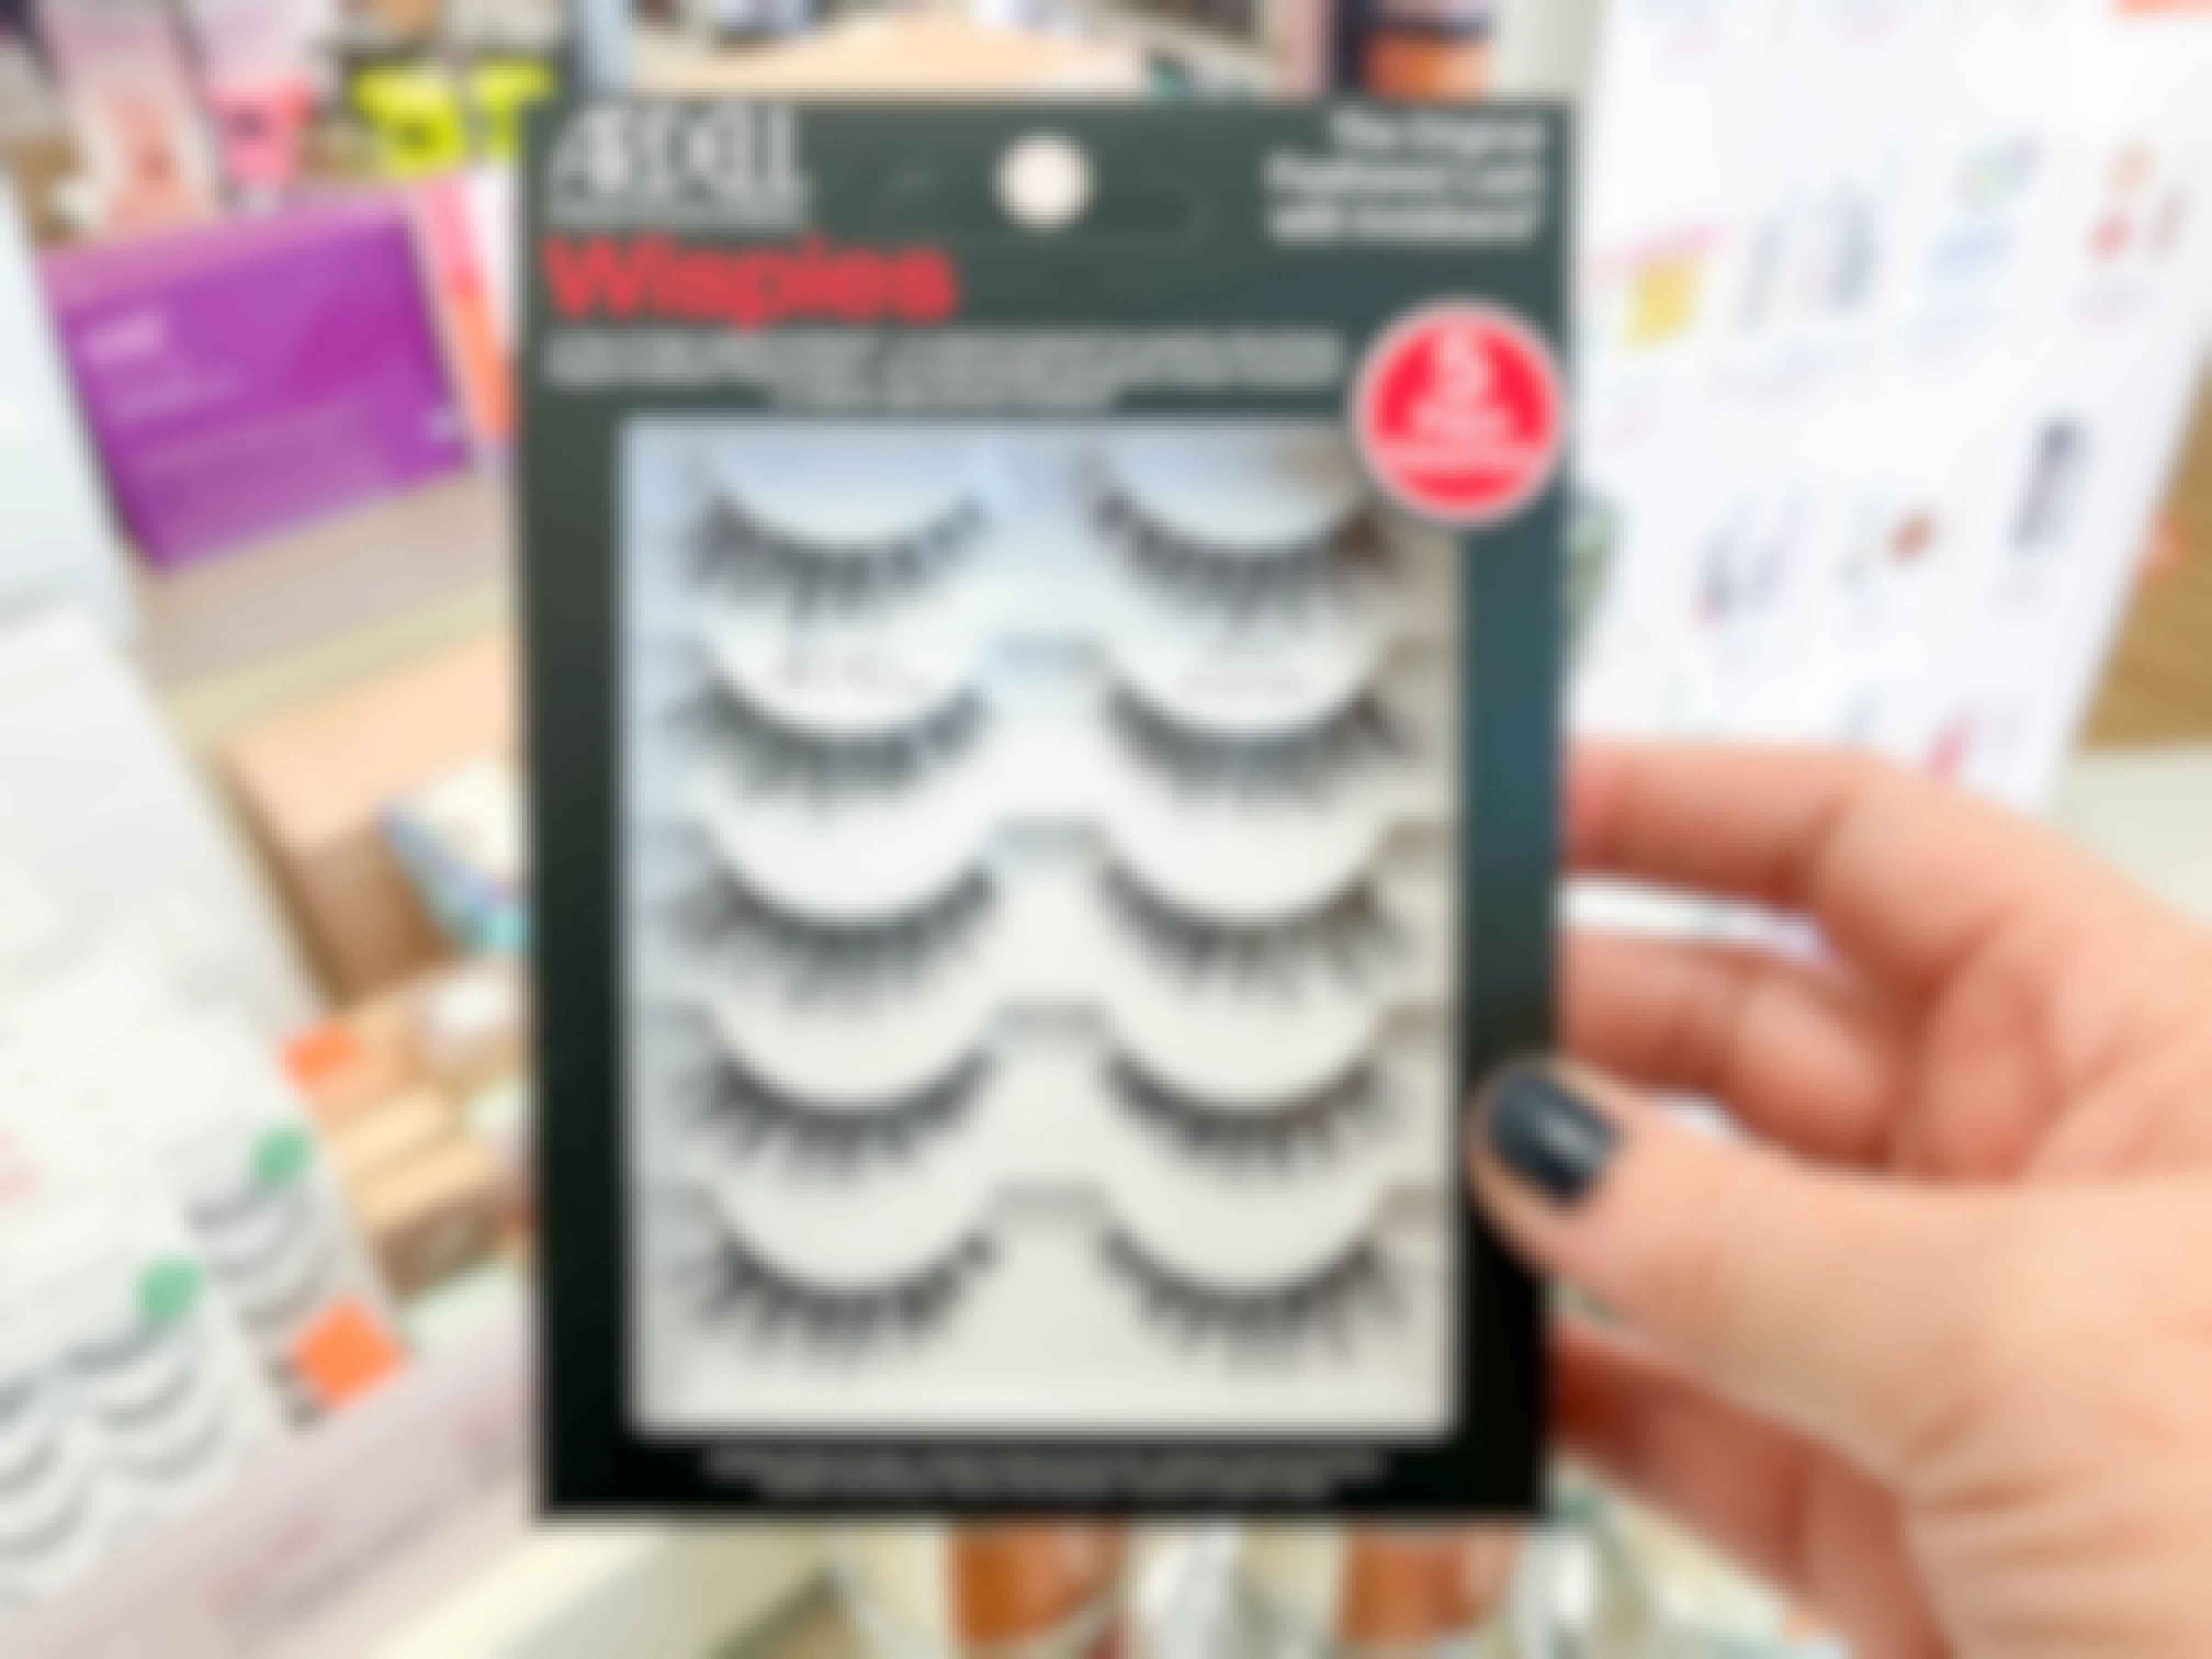 ardell lashes being held up in store